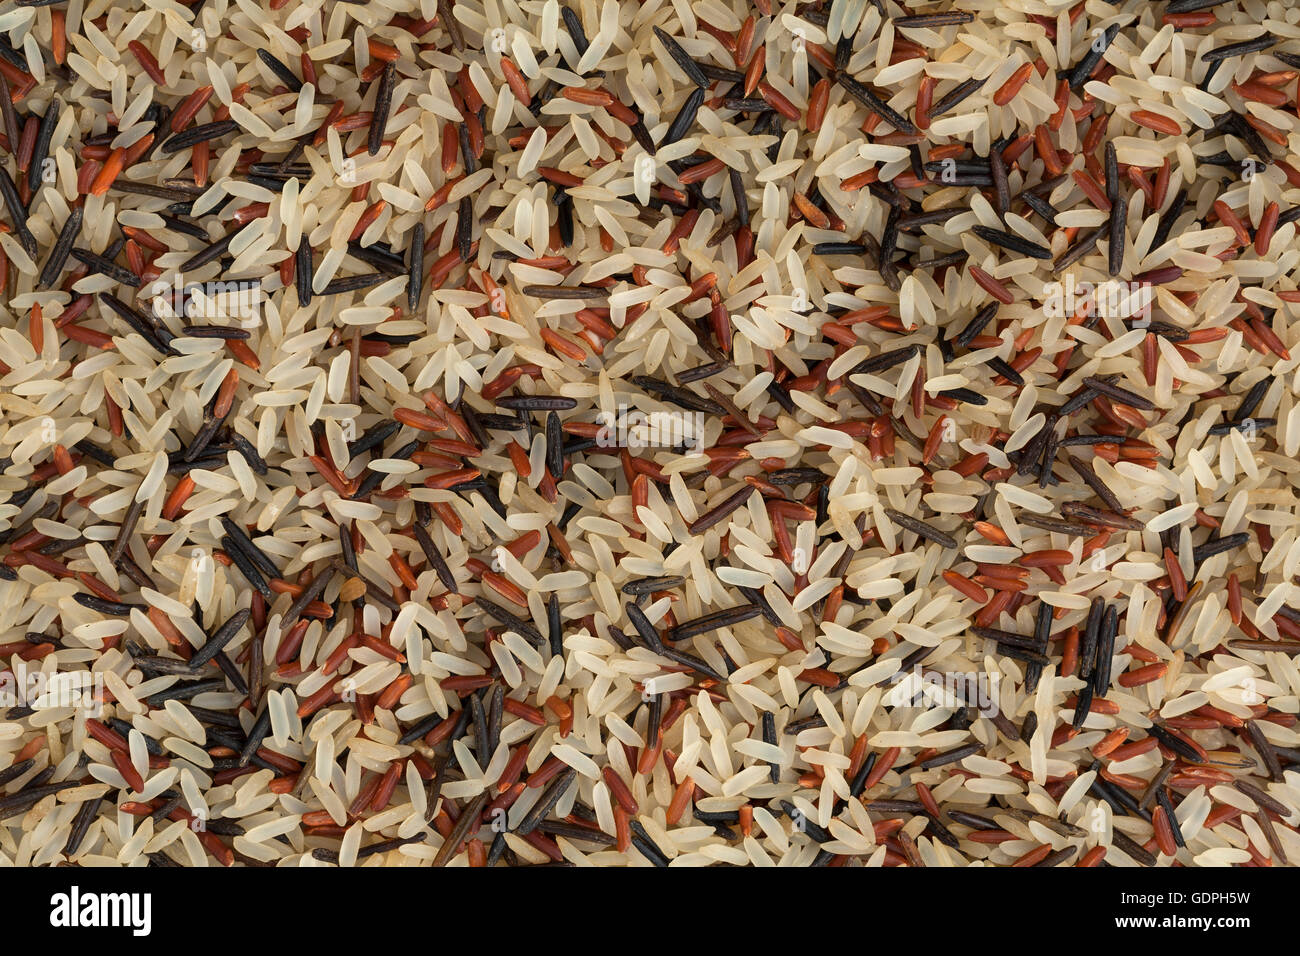 Mix of wild, red and white rice full frame Stock Photo